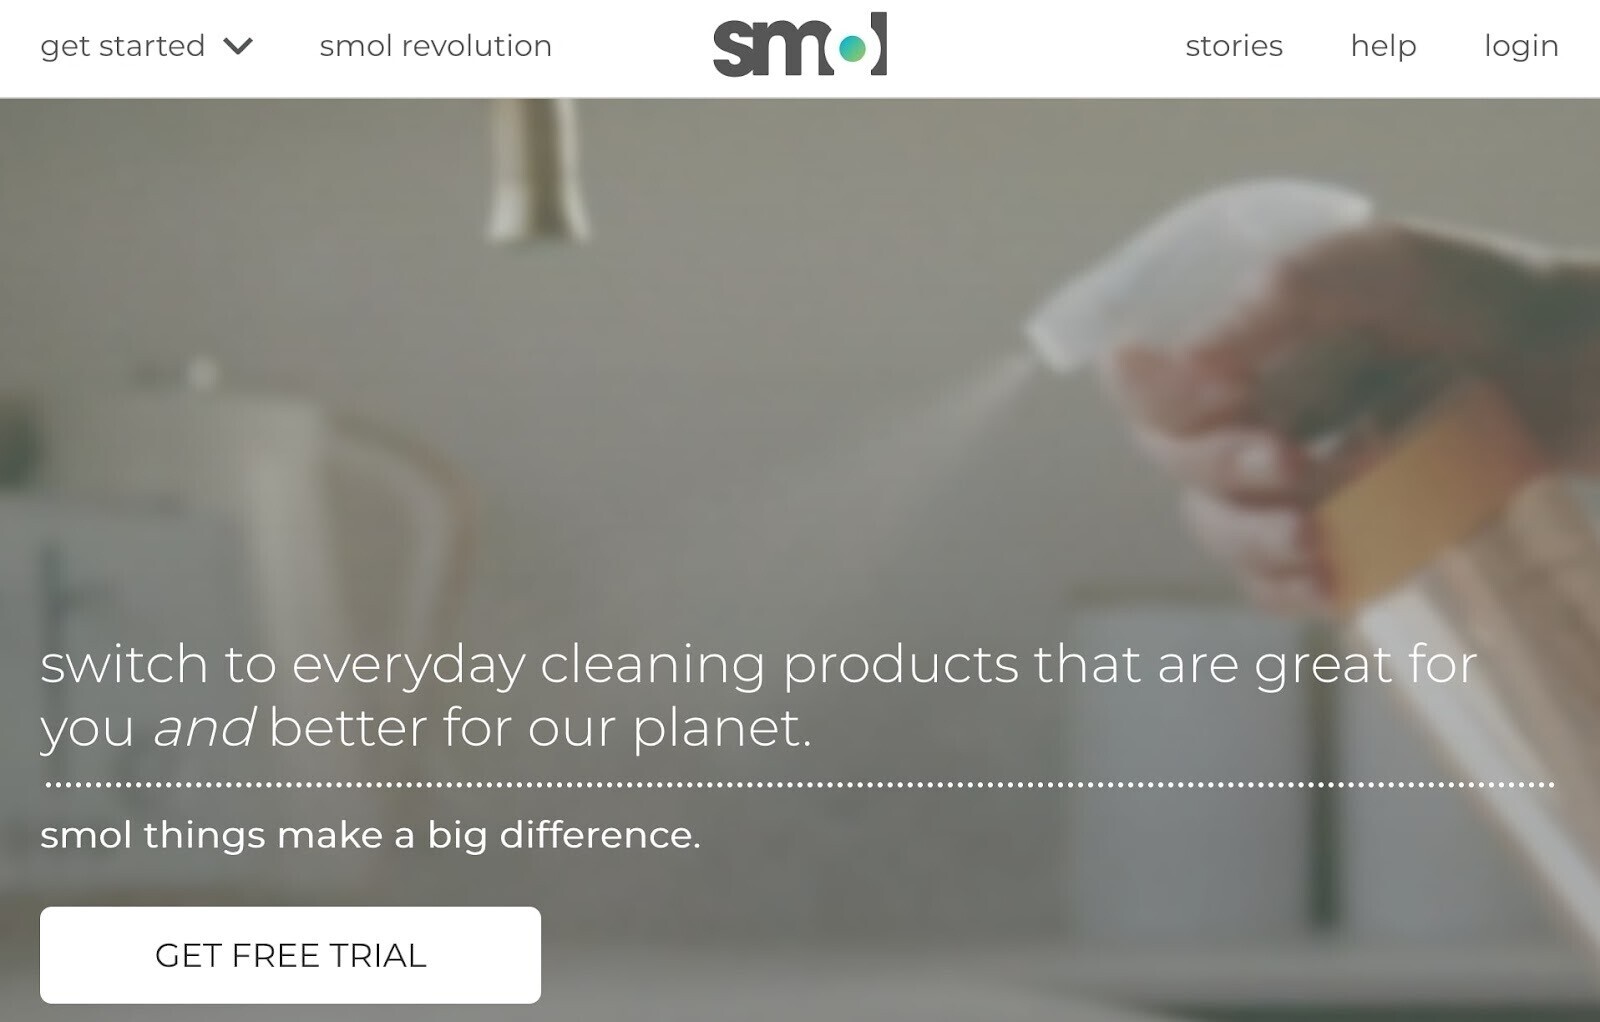 smol invites customers to switch to cleaning product that are better for the planet, its homepage